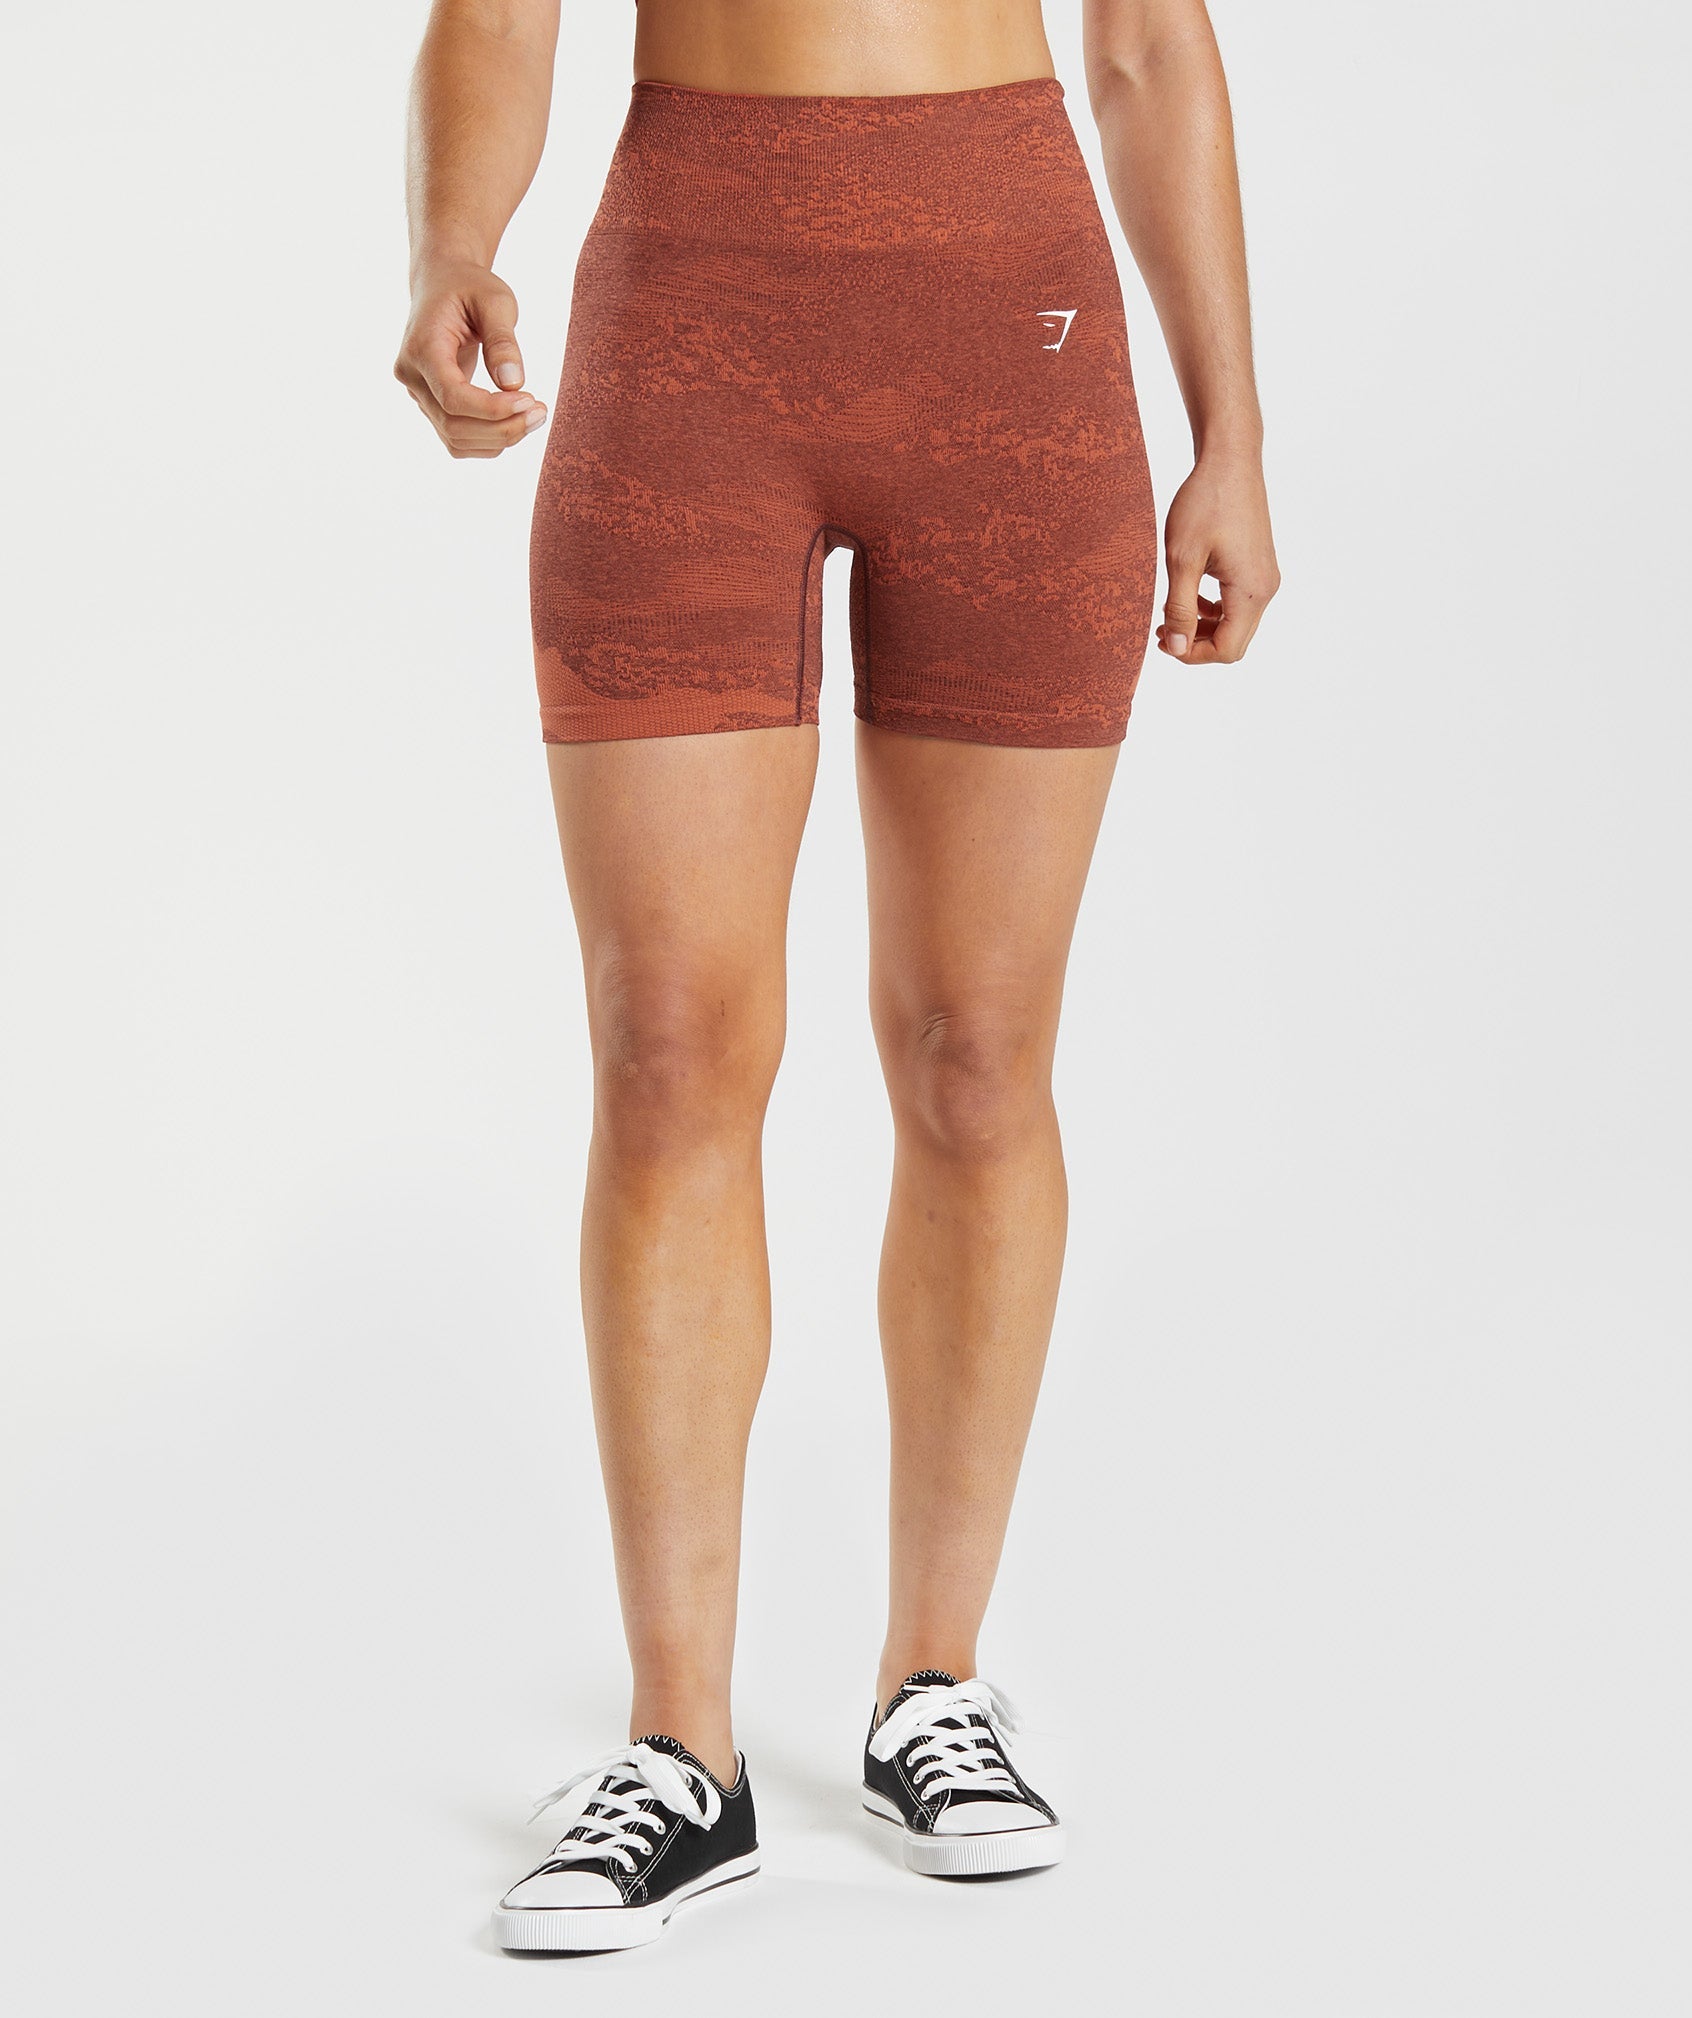 Adapt Camo Seamless Shorts in Storm Red/Cherry Brown